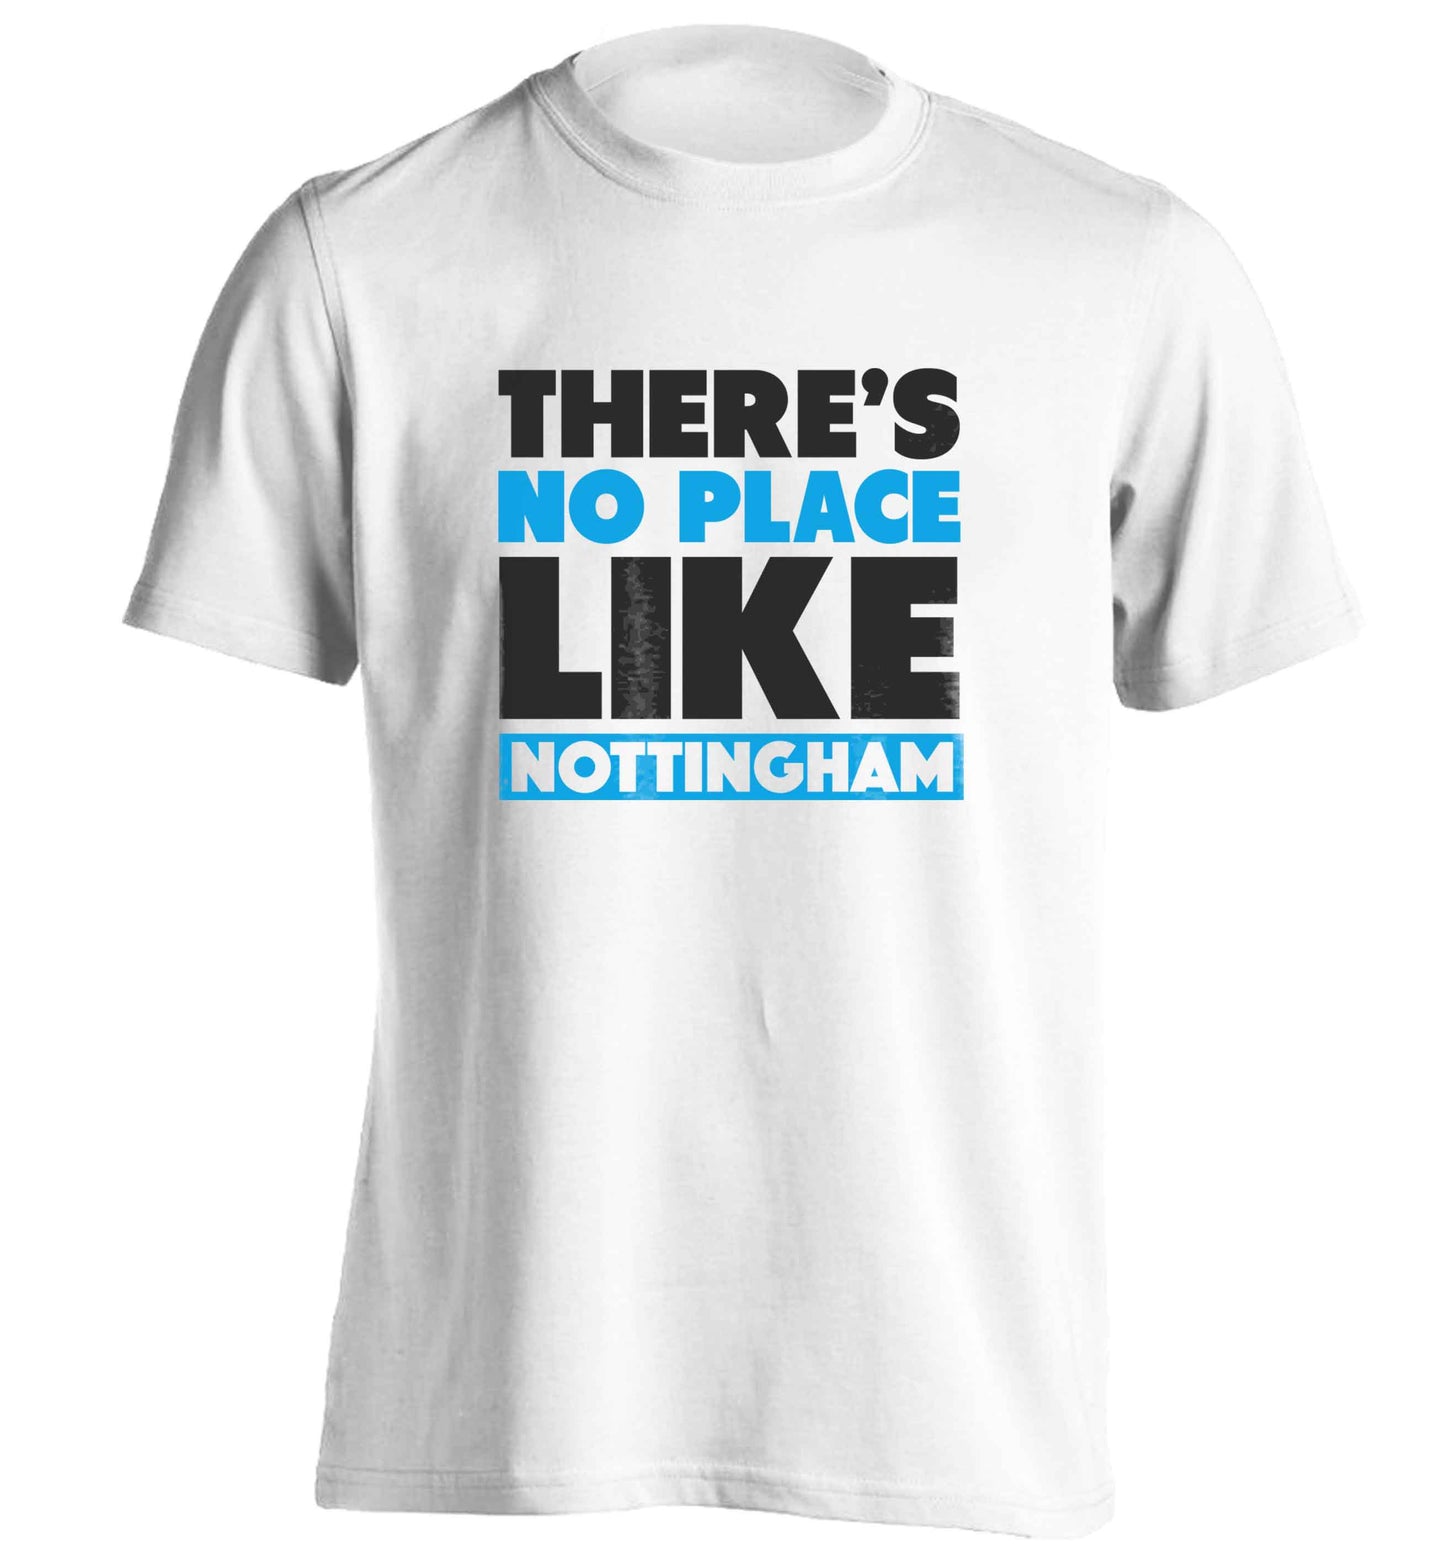 There's no place like Nottingham adults unisex white Tshirt 2XL